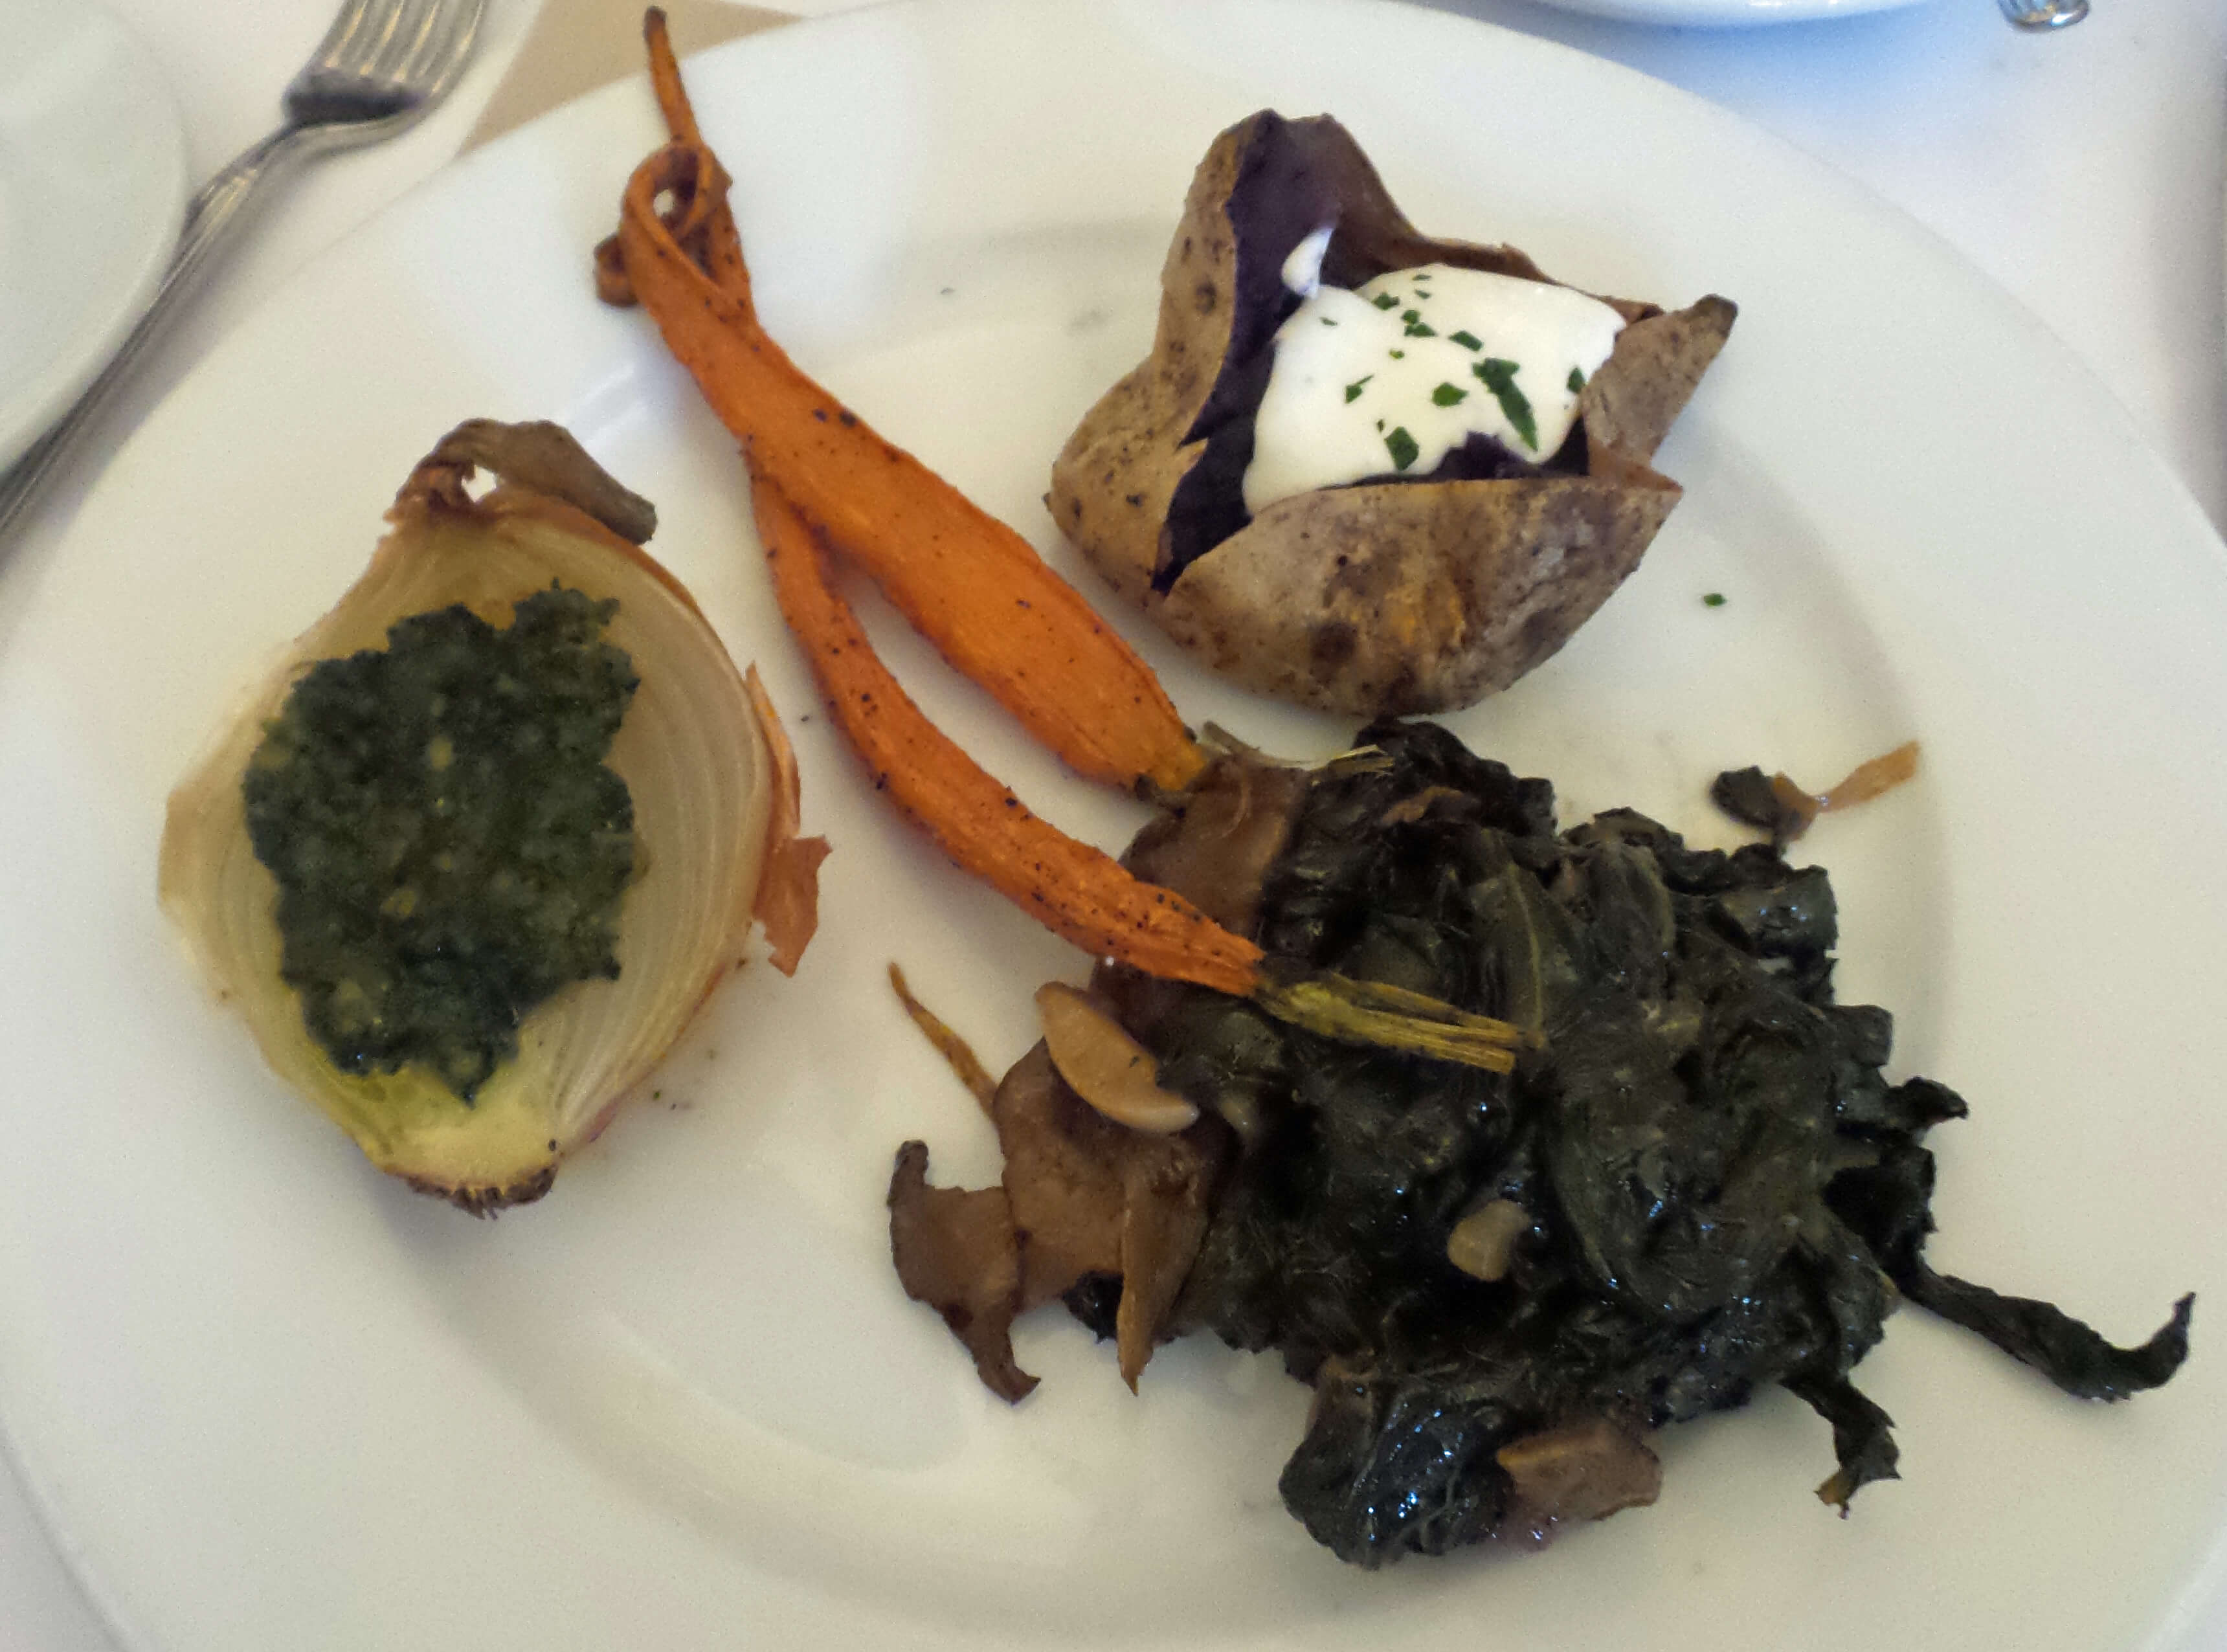 Vegetarian Entree option with spinach, sweet potato, carrots, onions.